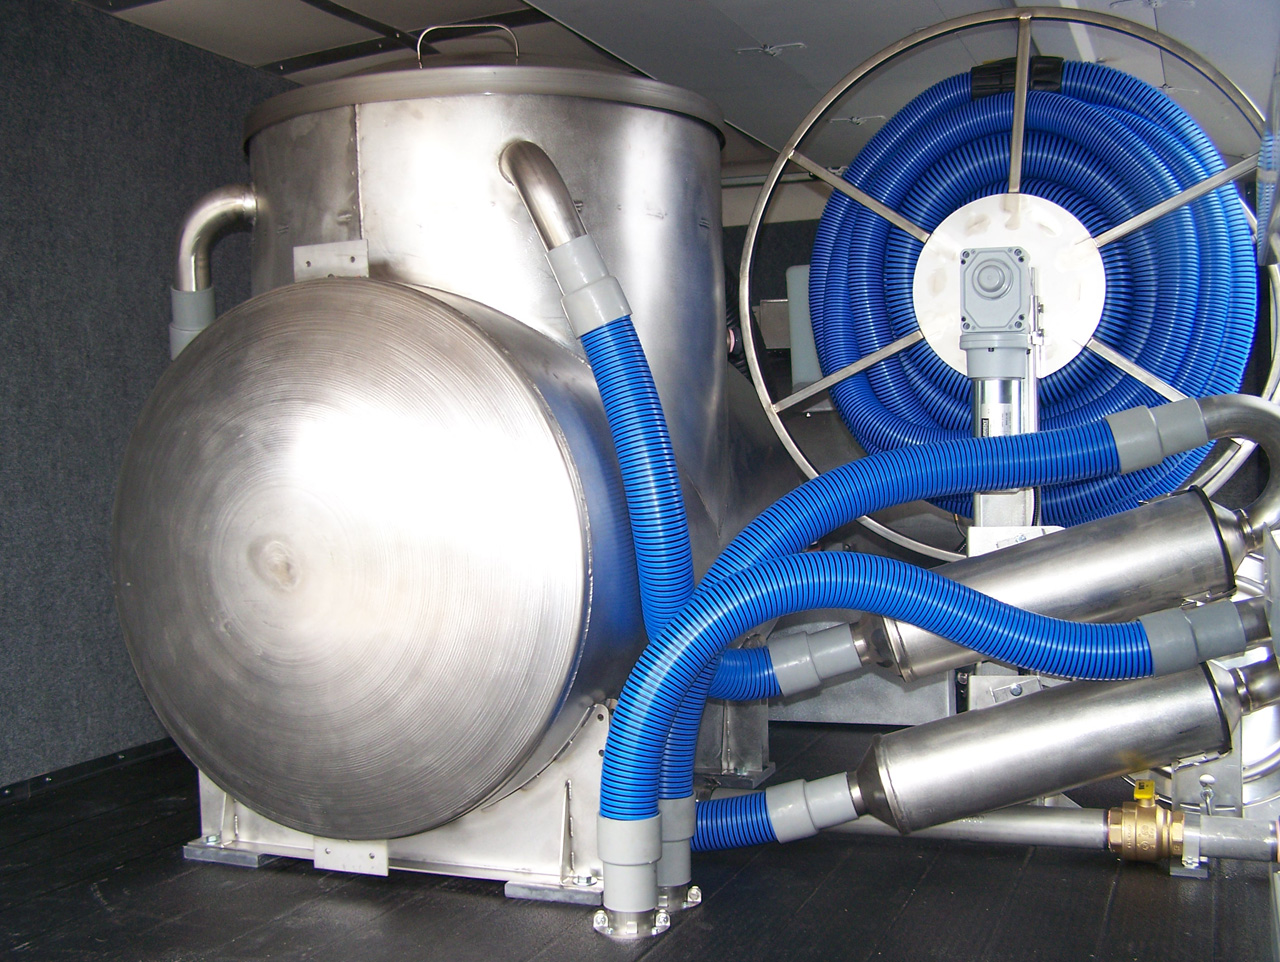 Stainless Steal Water Recovery Tank